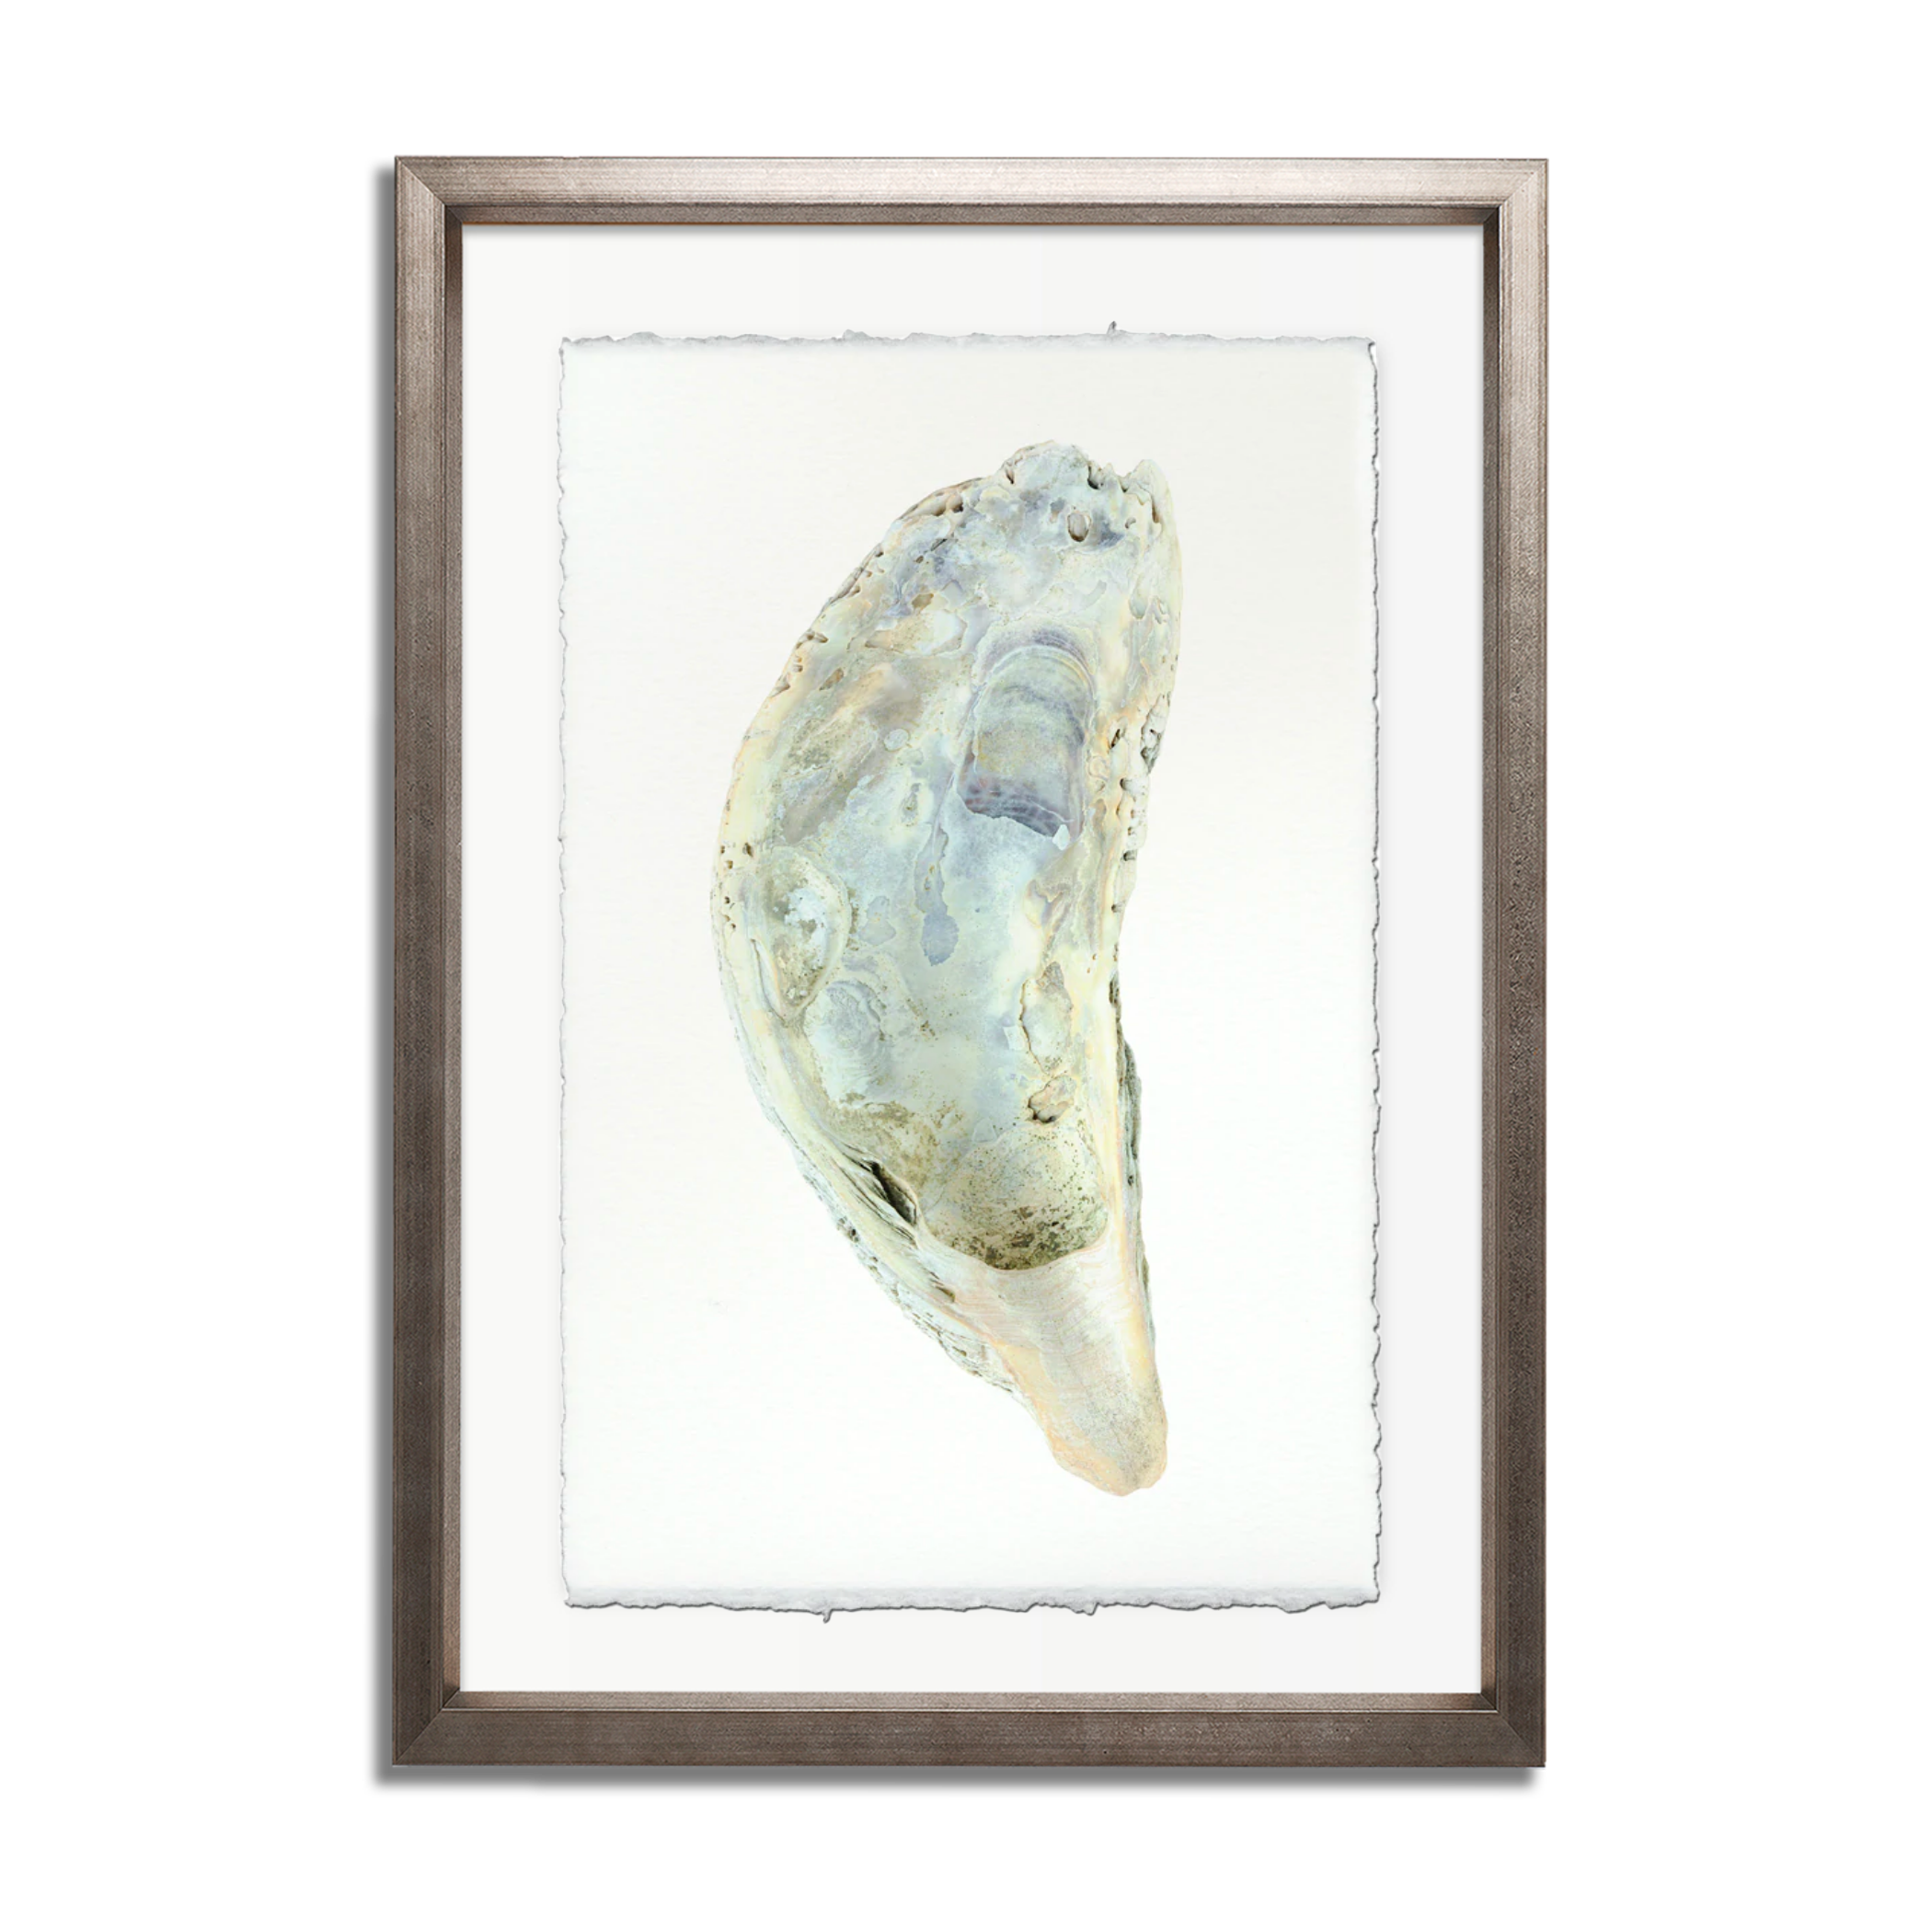 Oyster Study #5